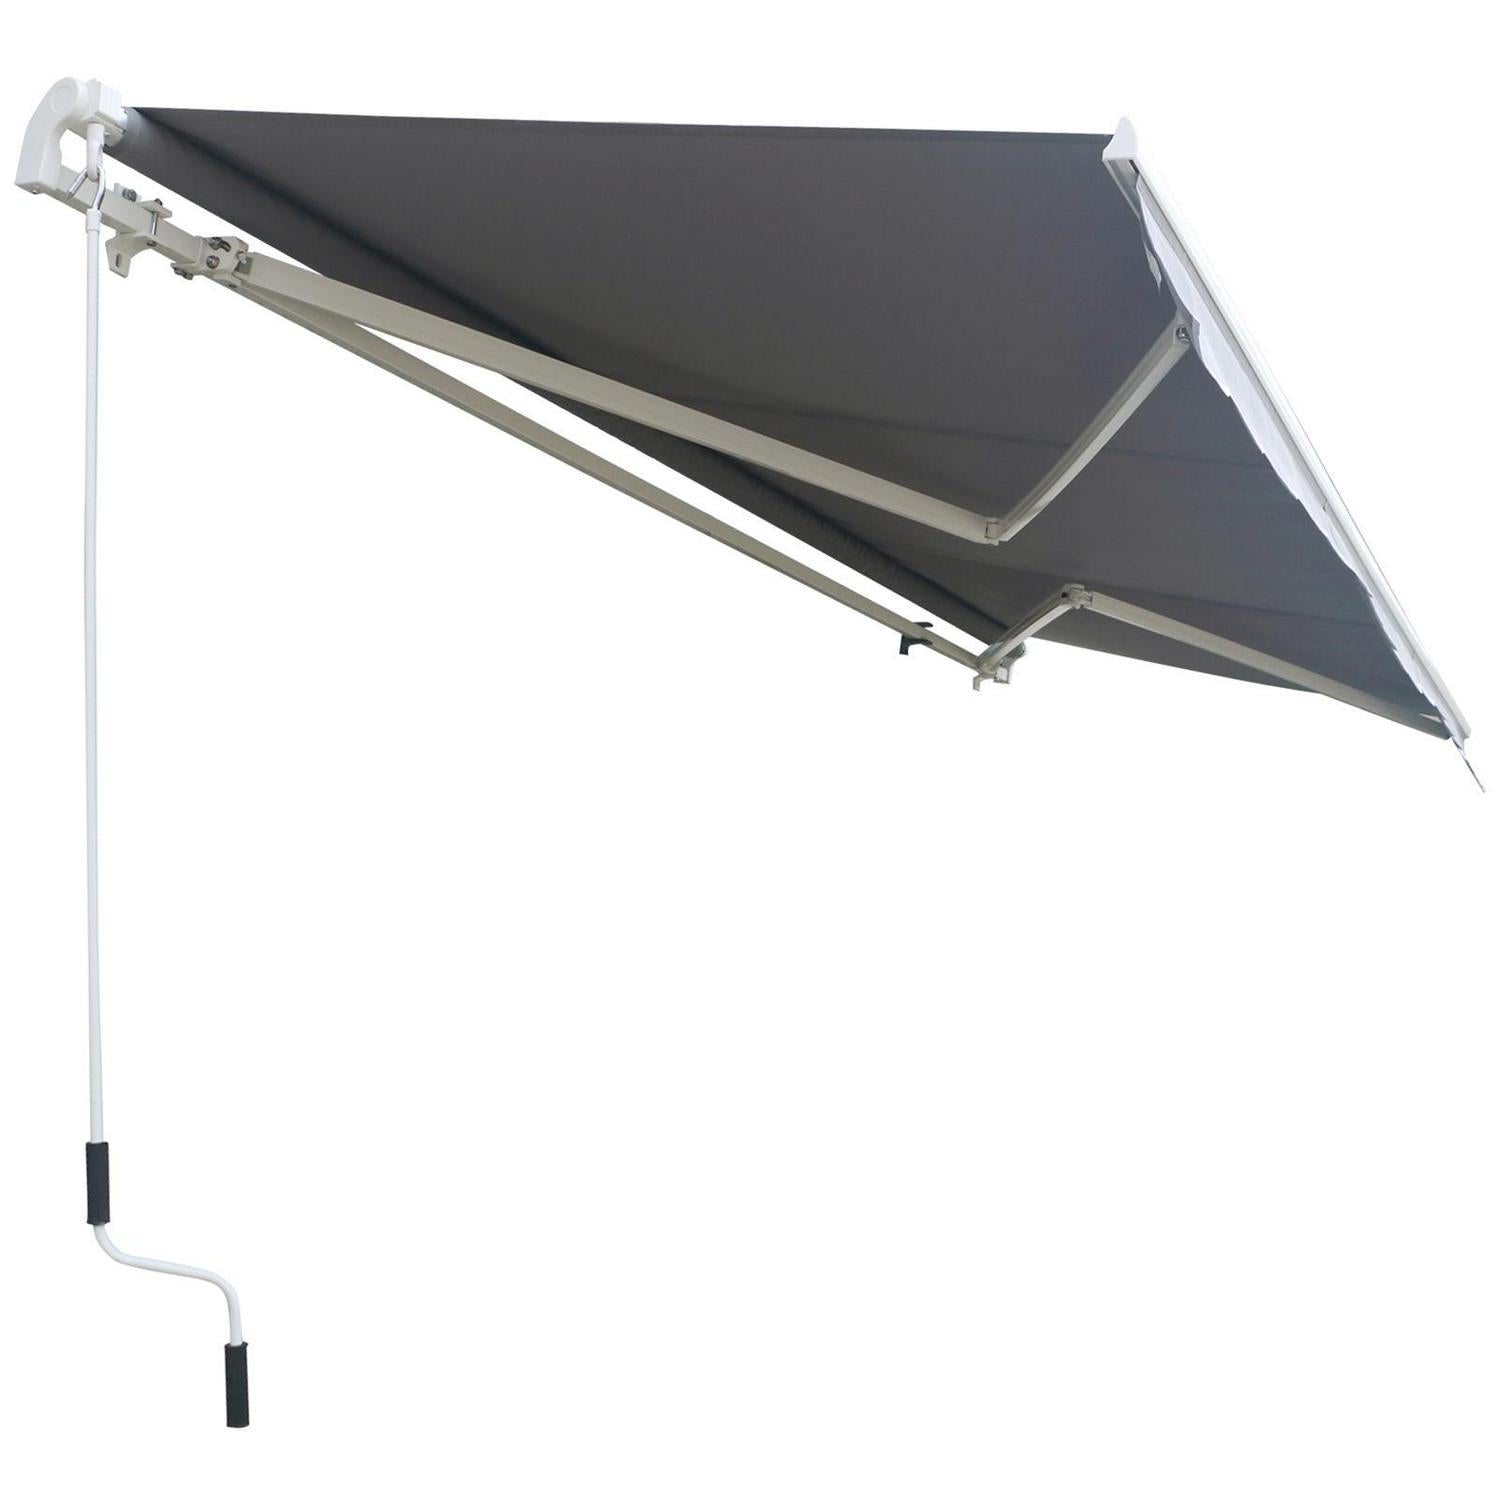 3 X 2.5m Manual Awning Canopy Sun Shade Shelter Retractable For Garden Grey